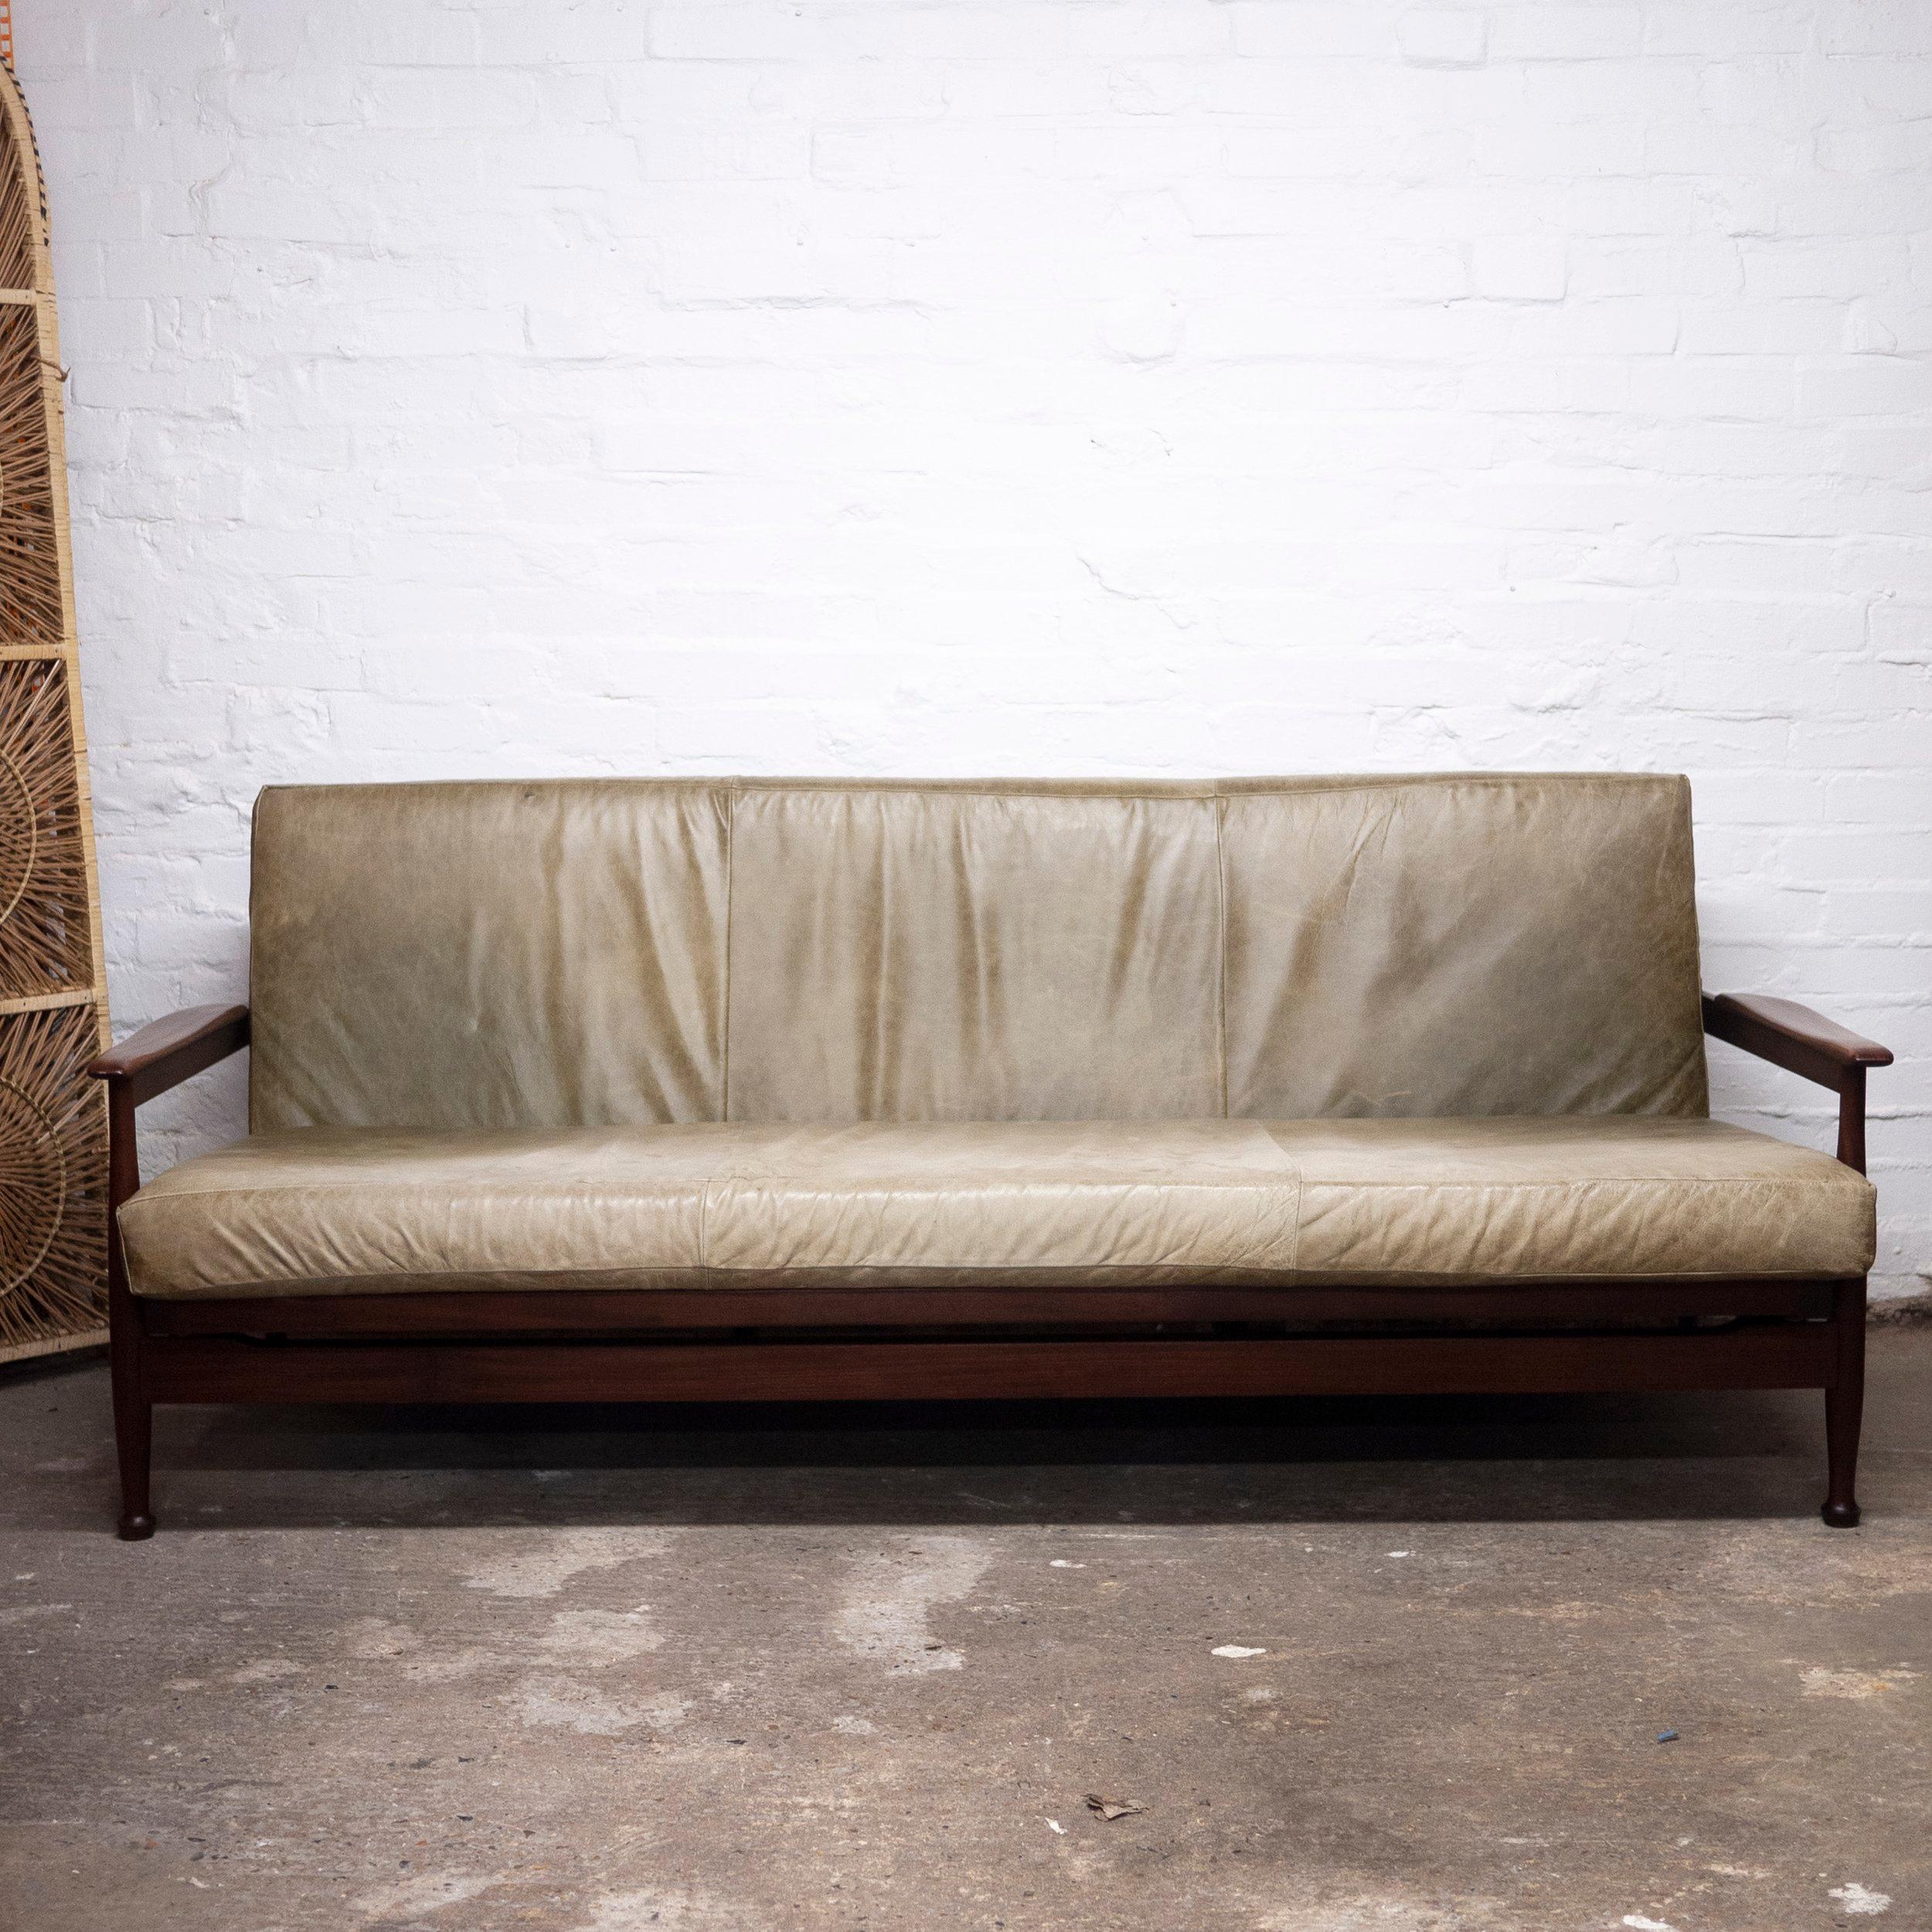 A sofa bed by Guy Rogers with an afromosia frame in green leather fabric.

Manufacturer - Guy Rogers

Designer - Eric Pamphilon and George Fejer

Design Period - 1960 to 1969

Style - Vintage, Mid-Century

Detailed Condition - Good

Restoration and